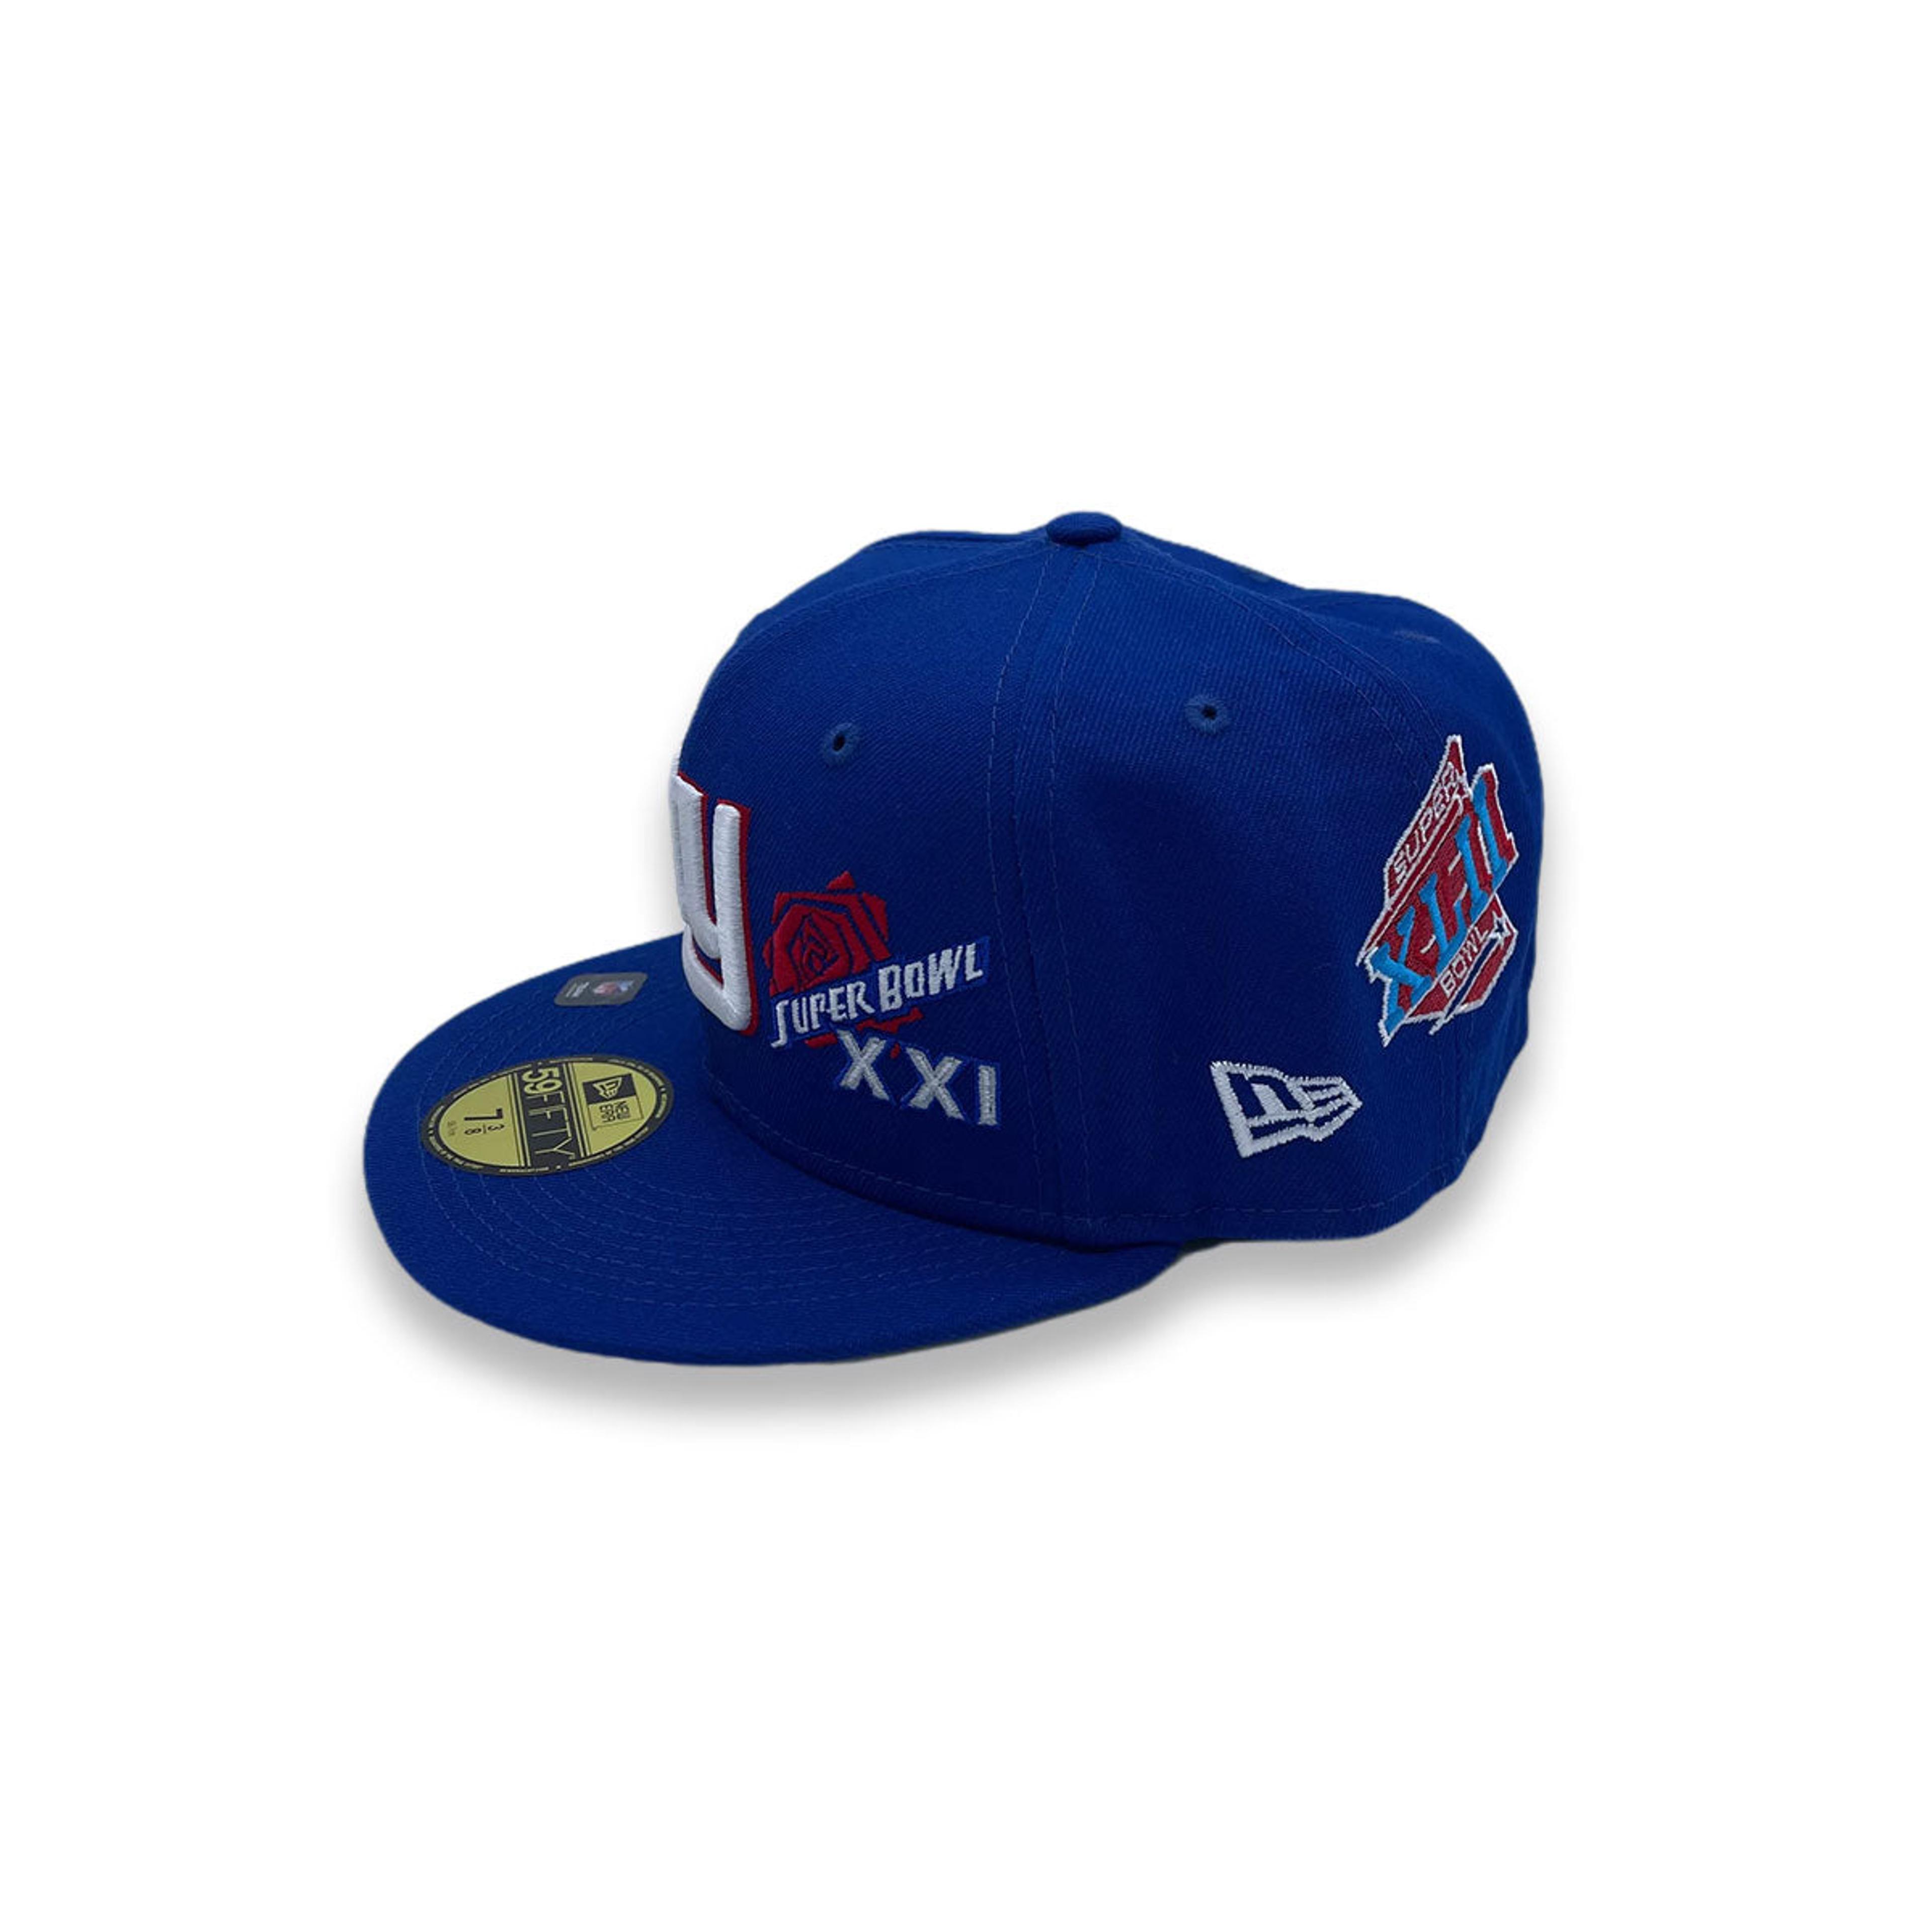 Alternate View 3 of New Era 59Fifty New York Giants 'Count the Rings' Fitted Hat Roy